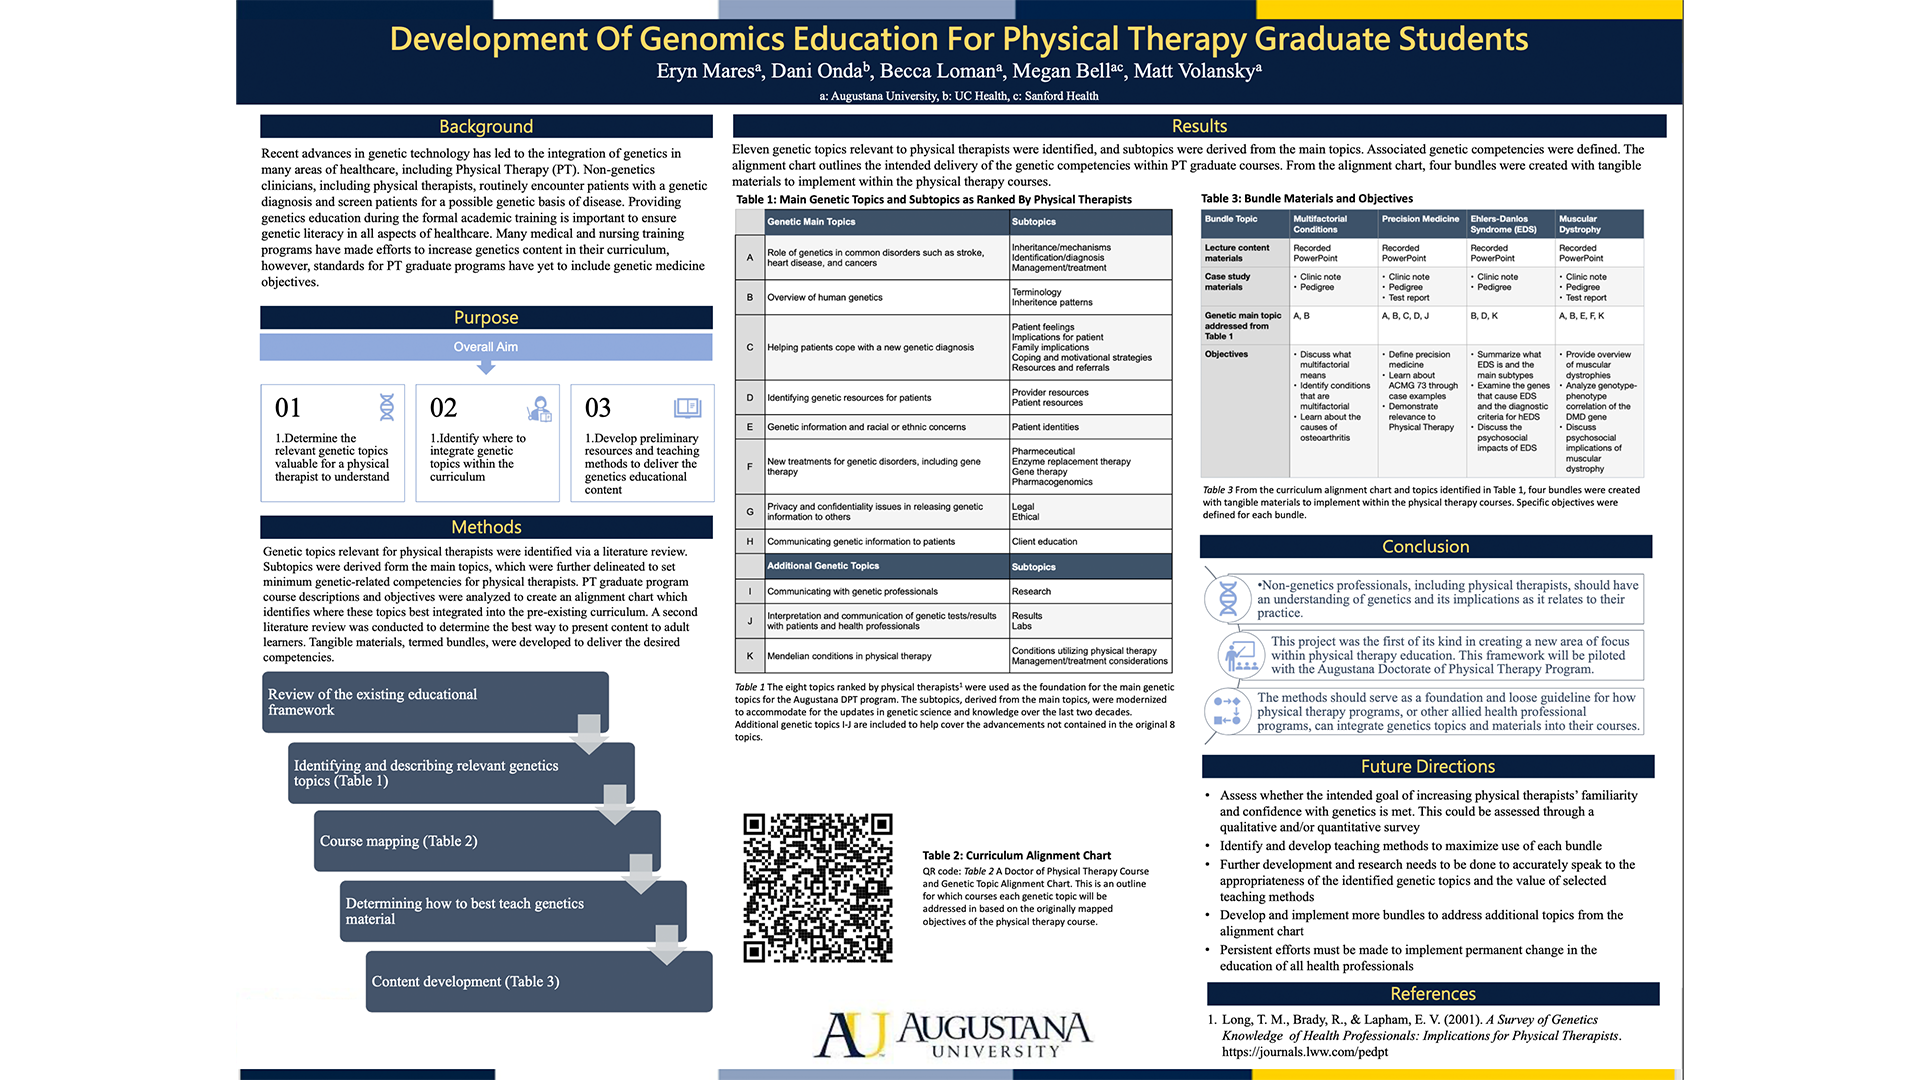 Development Of Genomics Education For Physical Therapy Graduate Students Poster